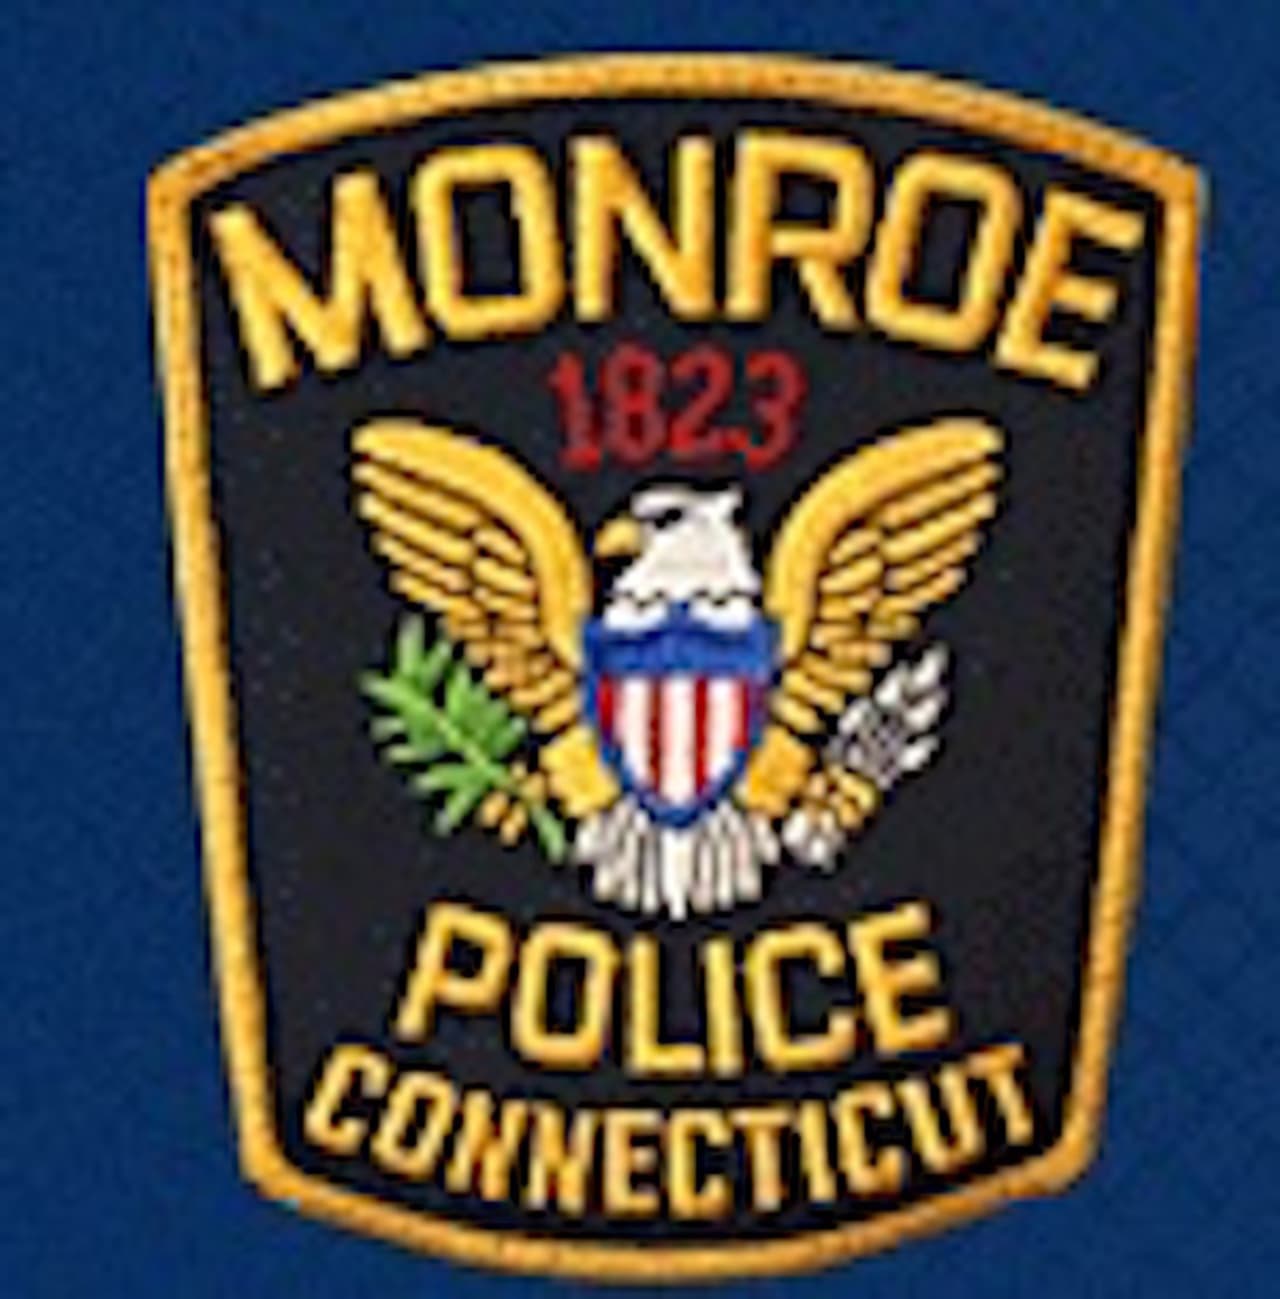 Police arrested a Monroe man after he allegedly attacked and choked his girlfriend.